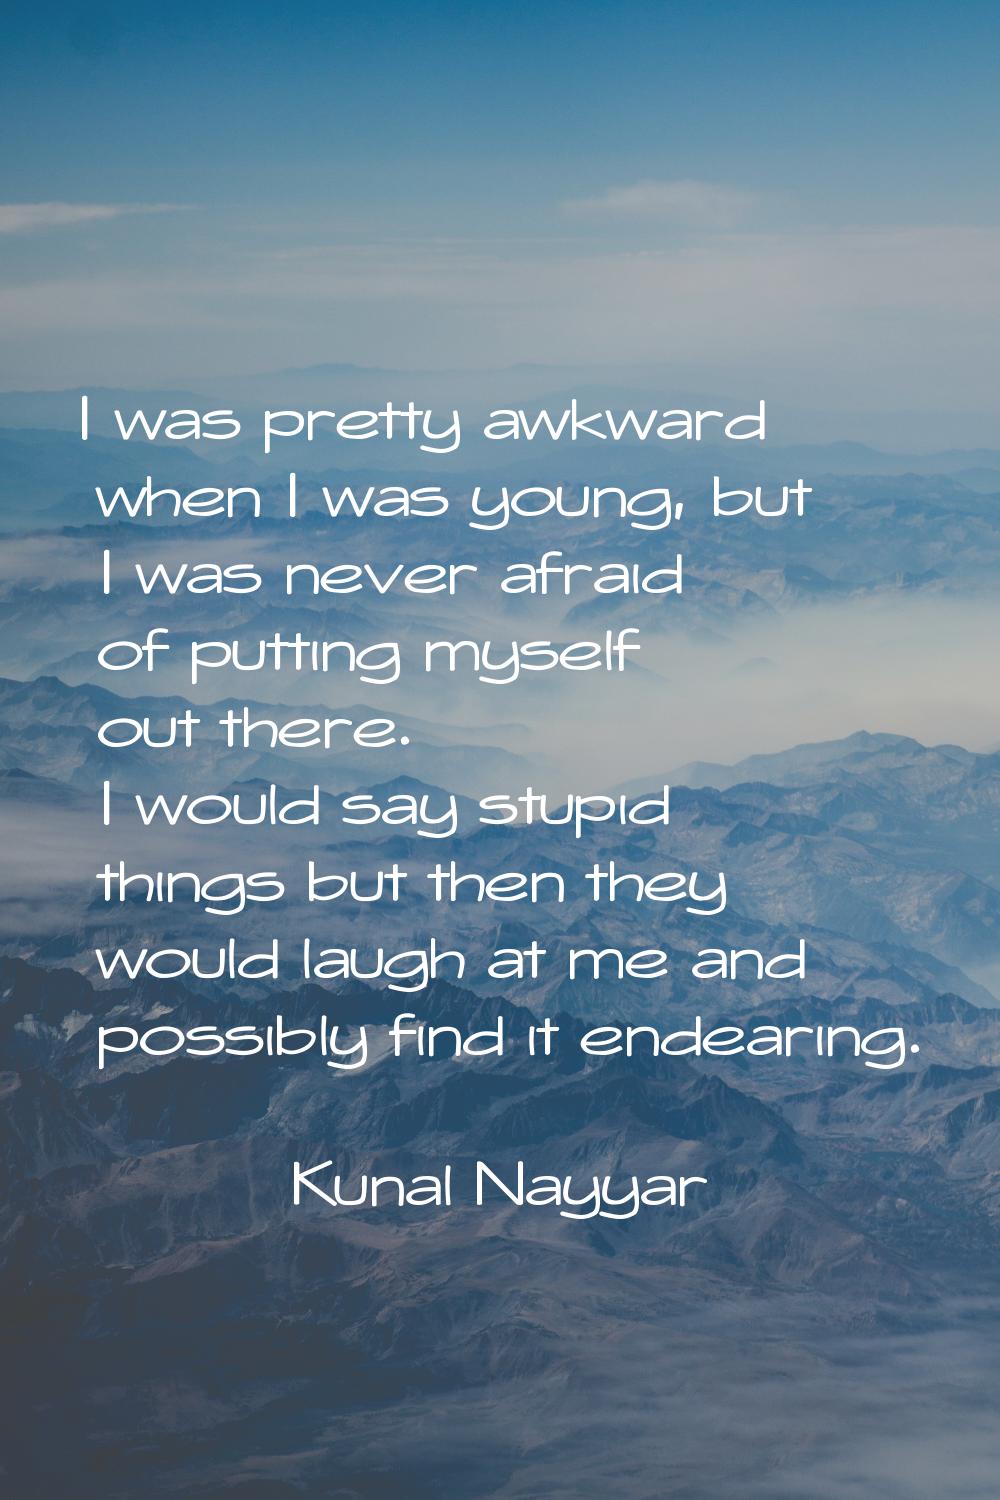 I was pretty awkward when I was young, but I was never afraid of putting myself out there. I would 